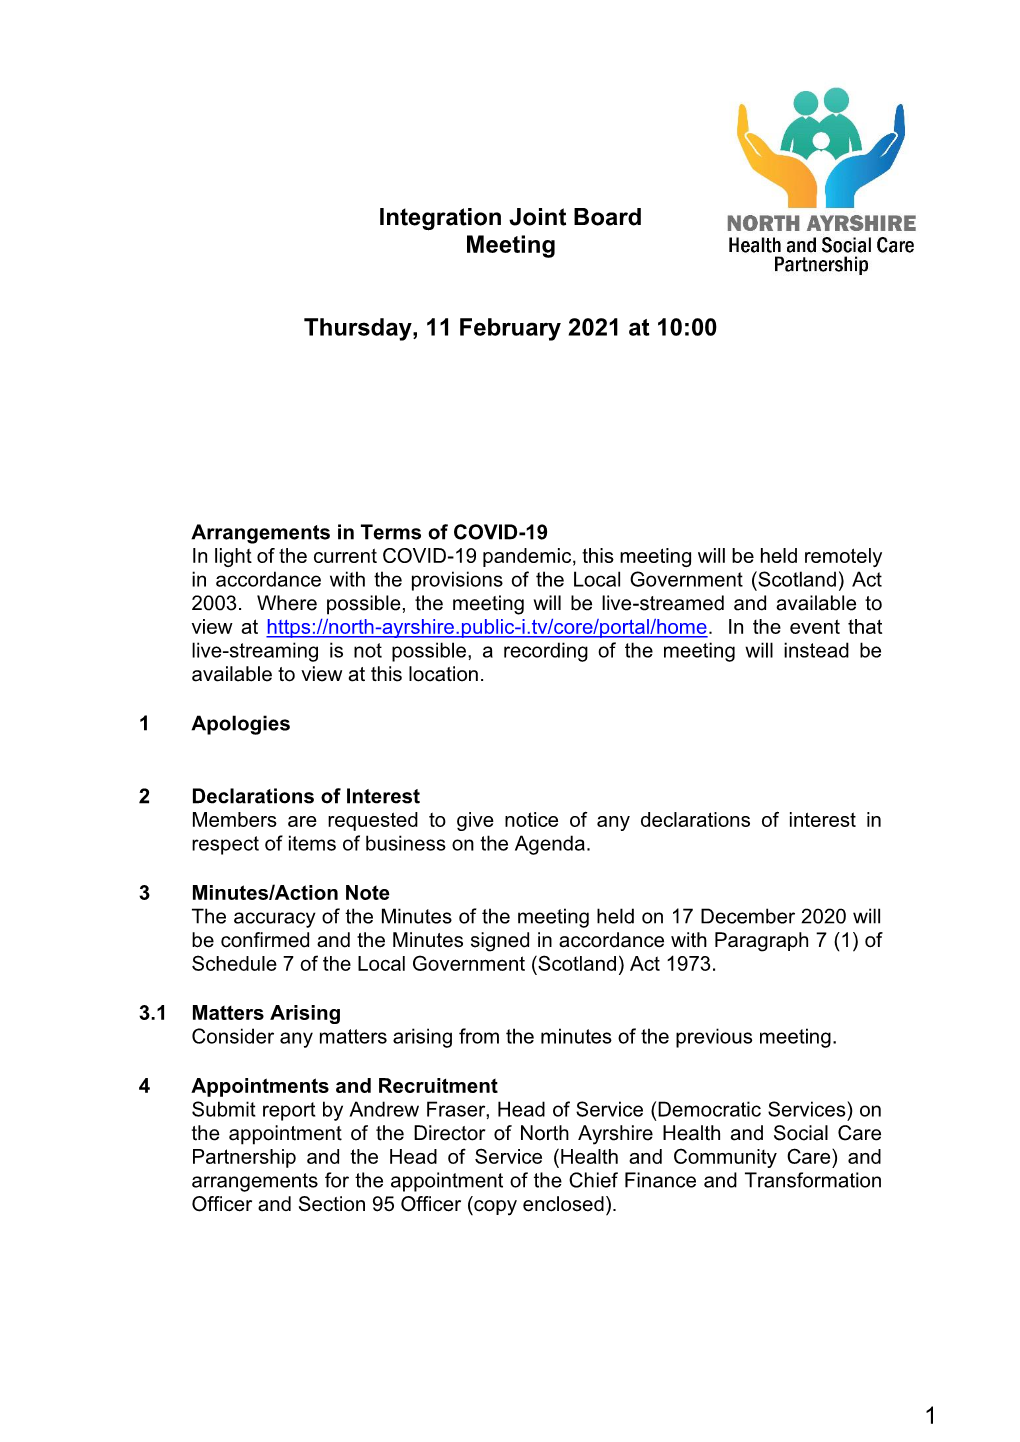 Integration Joint Board Meeting Thursday, 11 February 2021 at 10